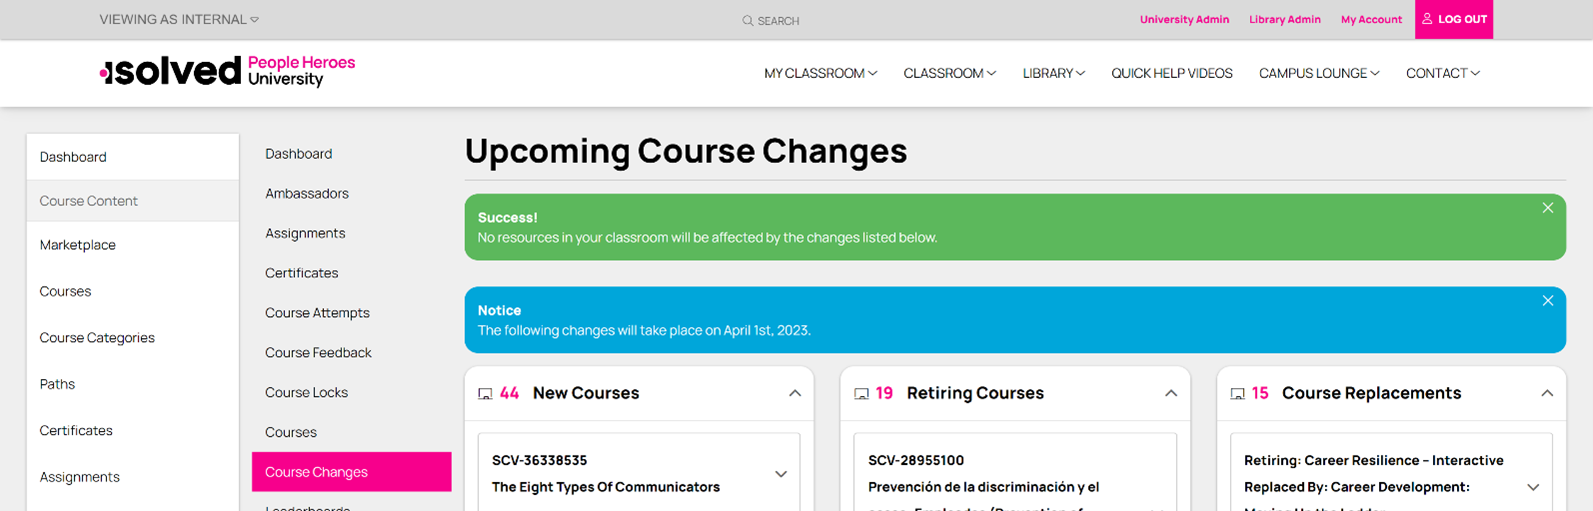 Upcoming Course Changes - No Concerns